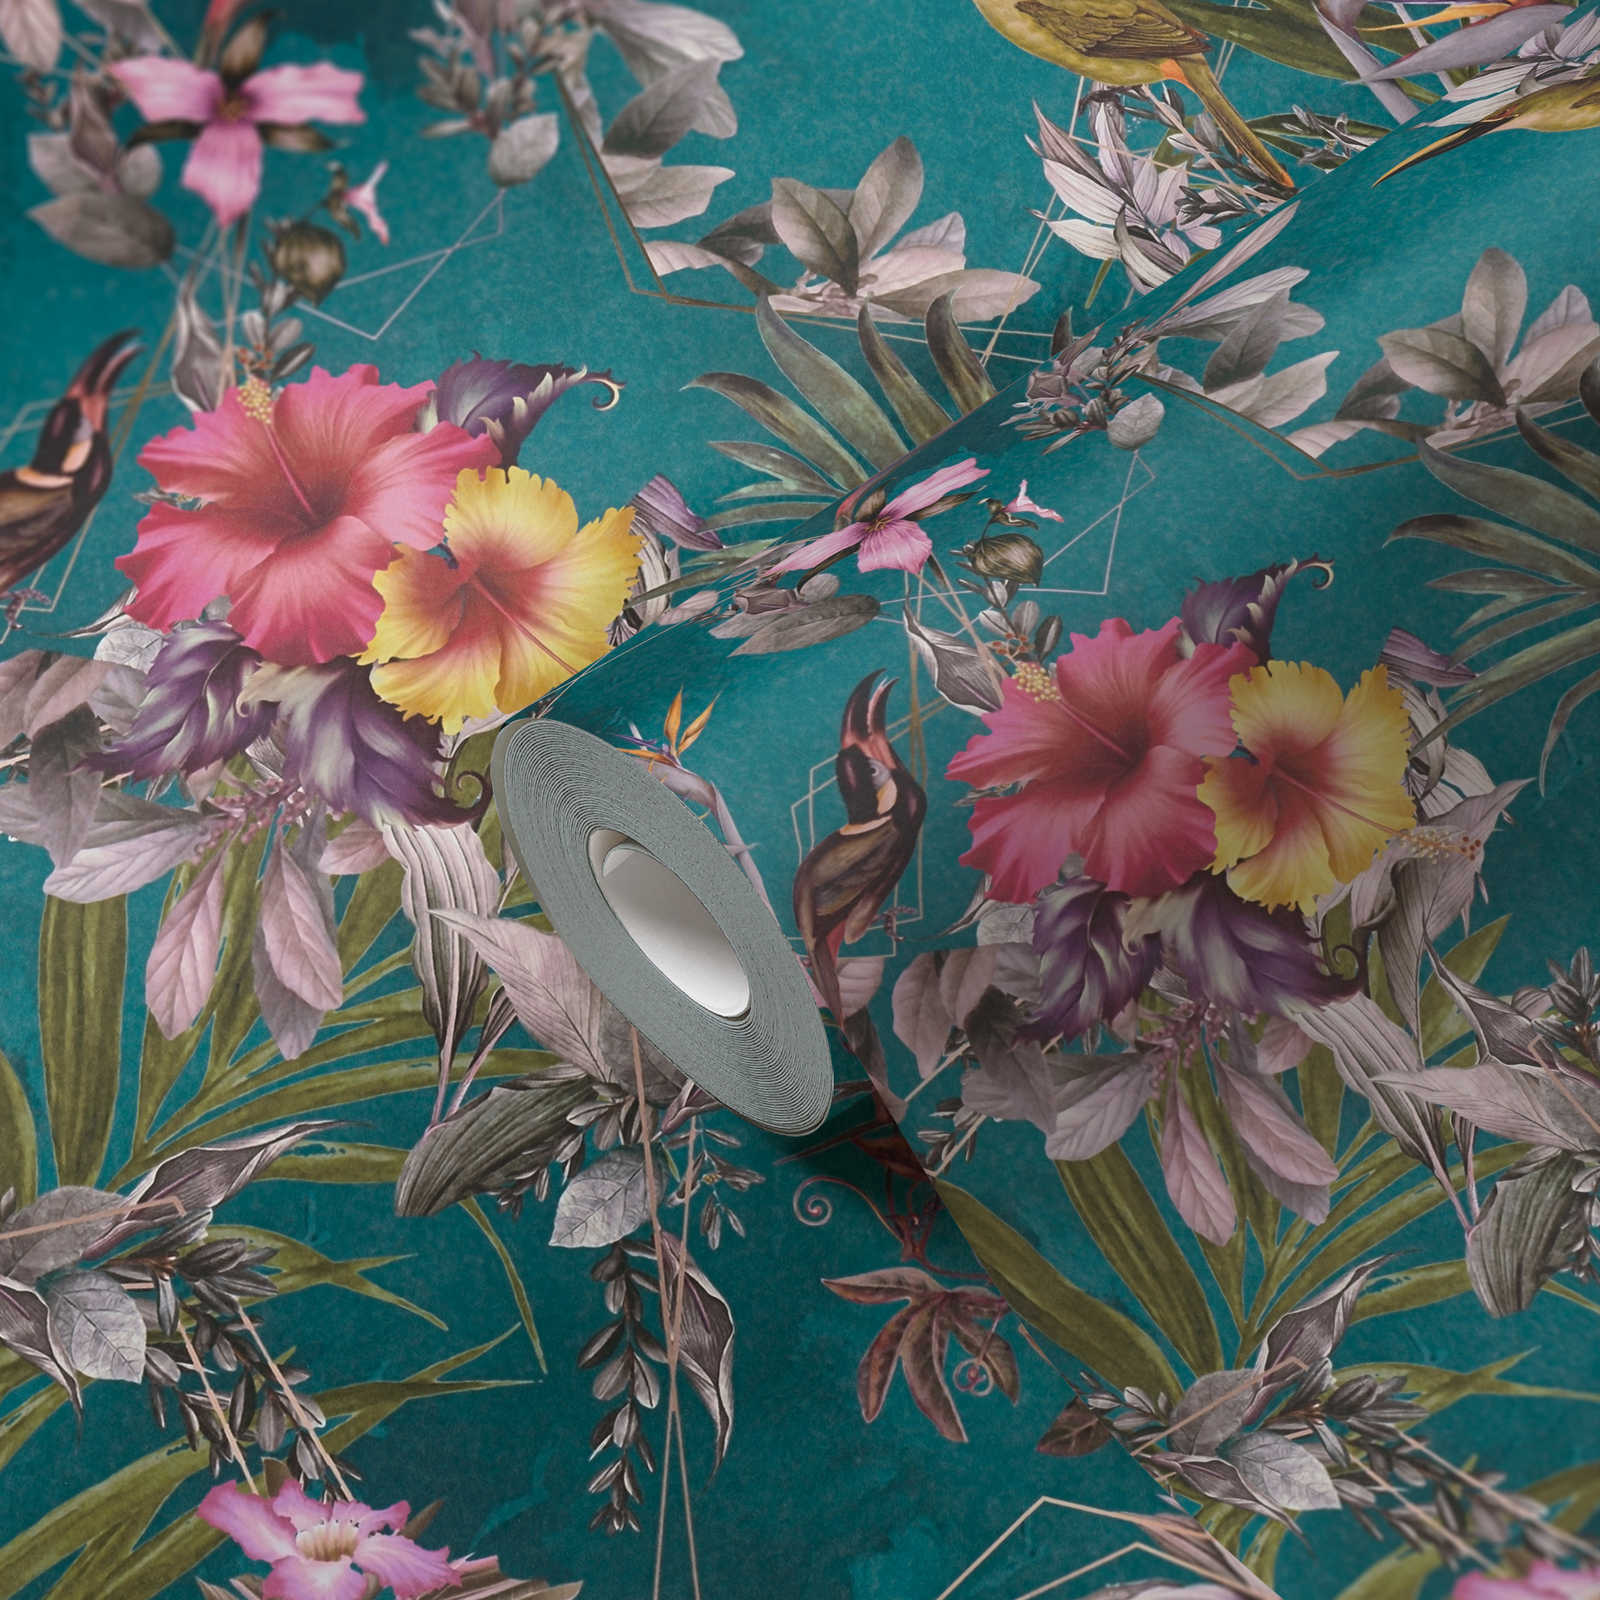             Jungle wallpaper tropical flowers & birds - turquoise, green, colourful
        